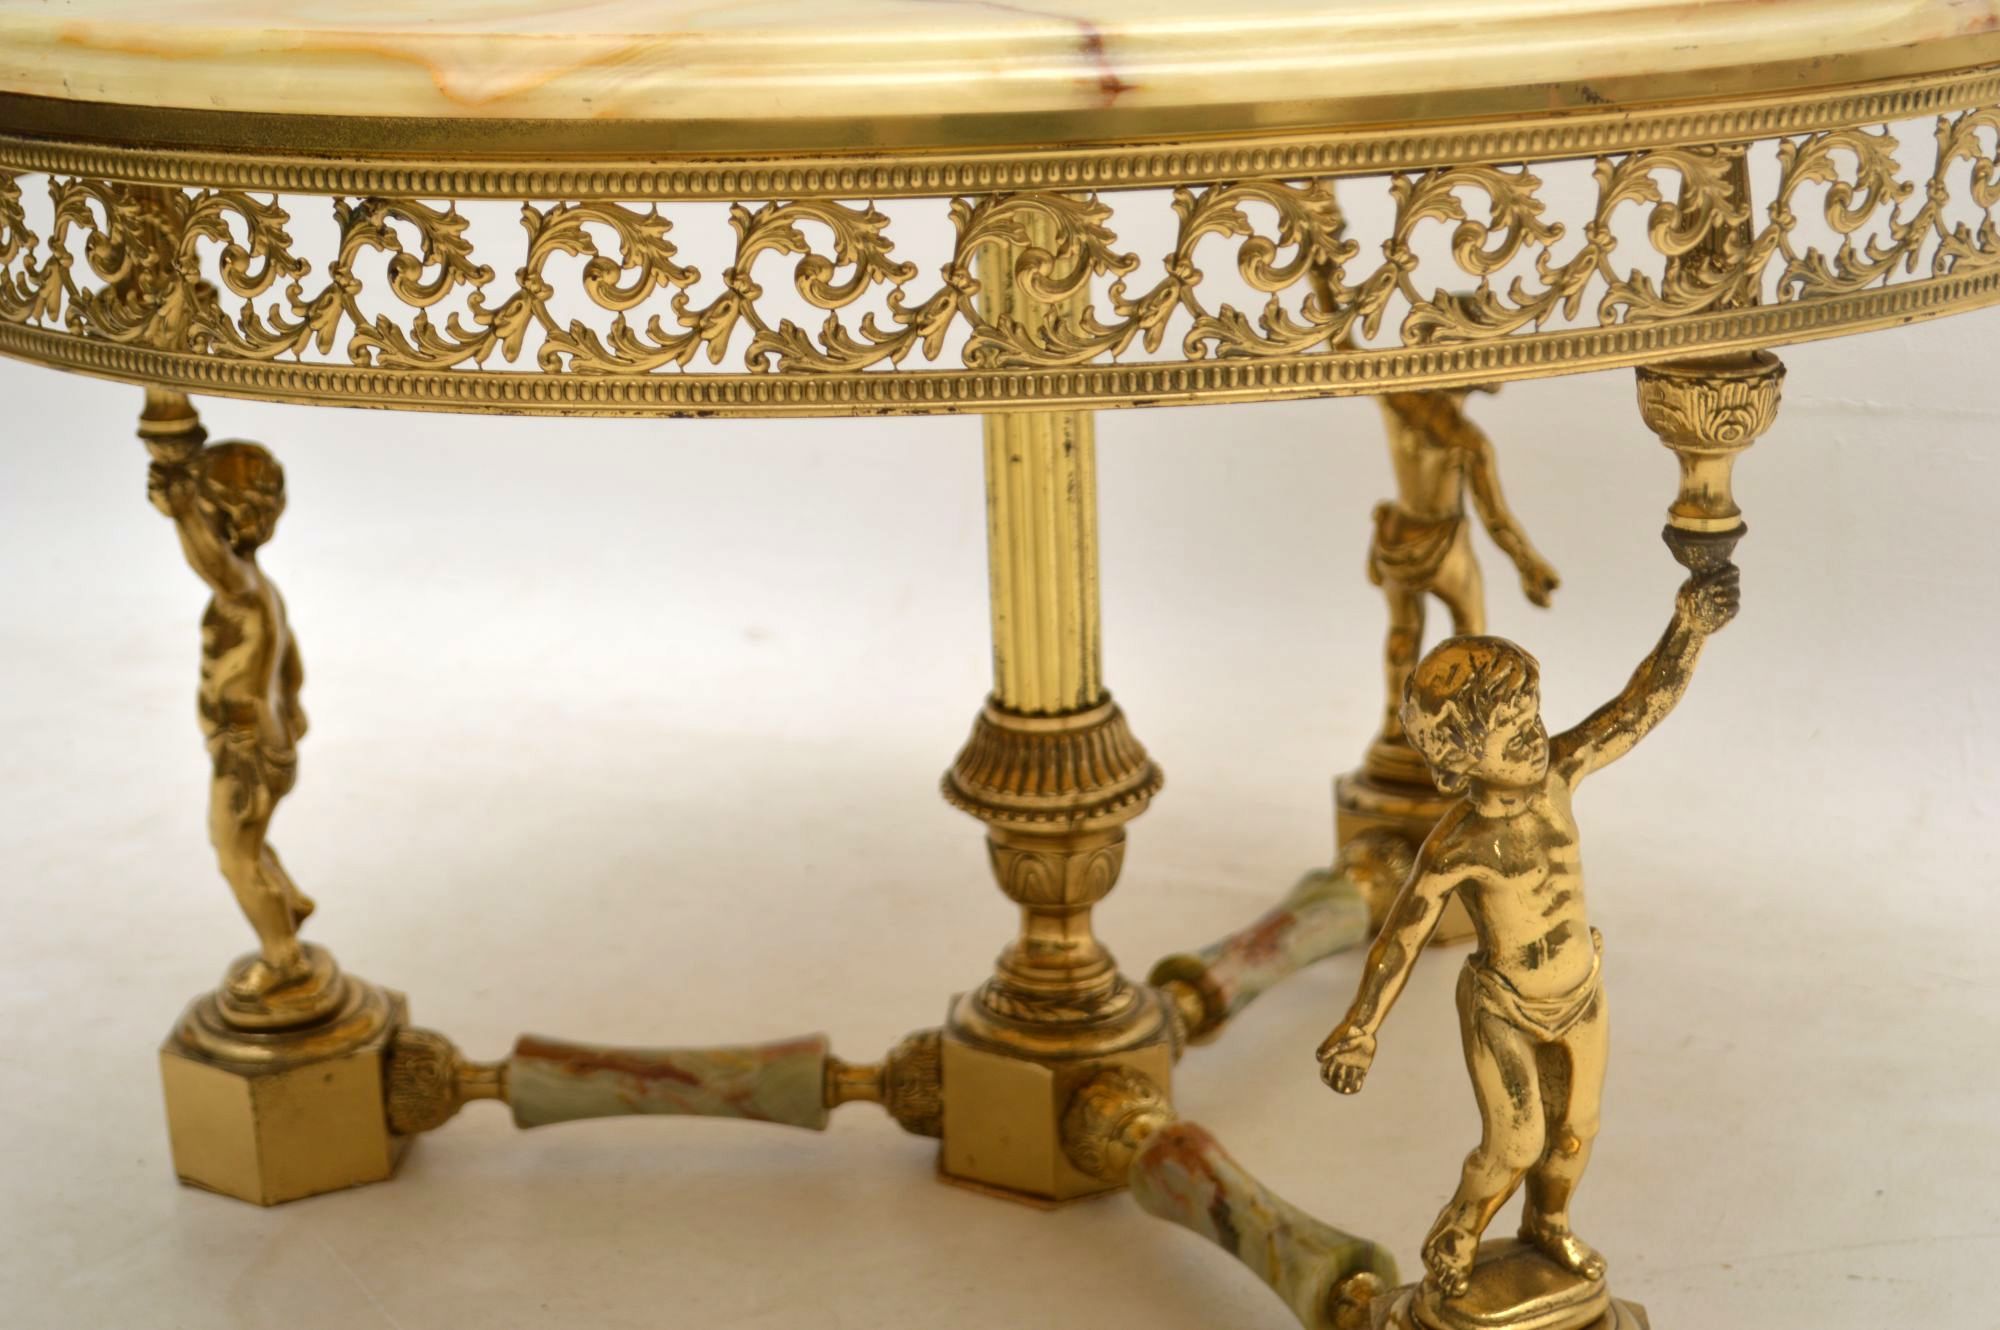 Antique Brass And Onyx Round Coffee Table – Marylebone Antiques In Antique Brass Round Console Tables (View 1 of 20)